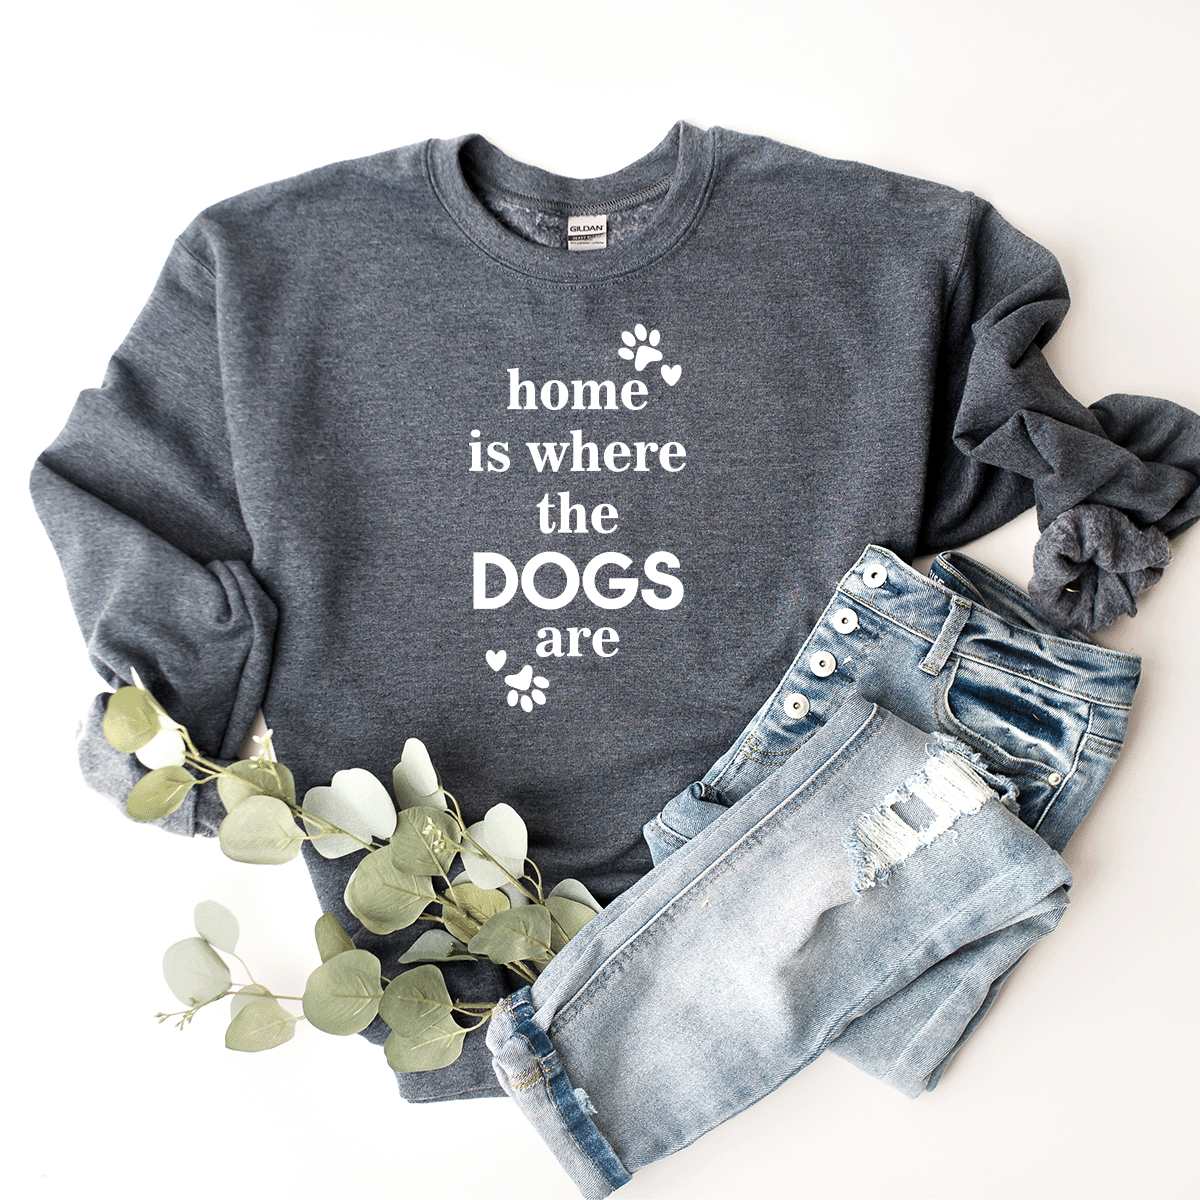 Home Is Where The Dogs Are - Sweatshirt